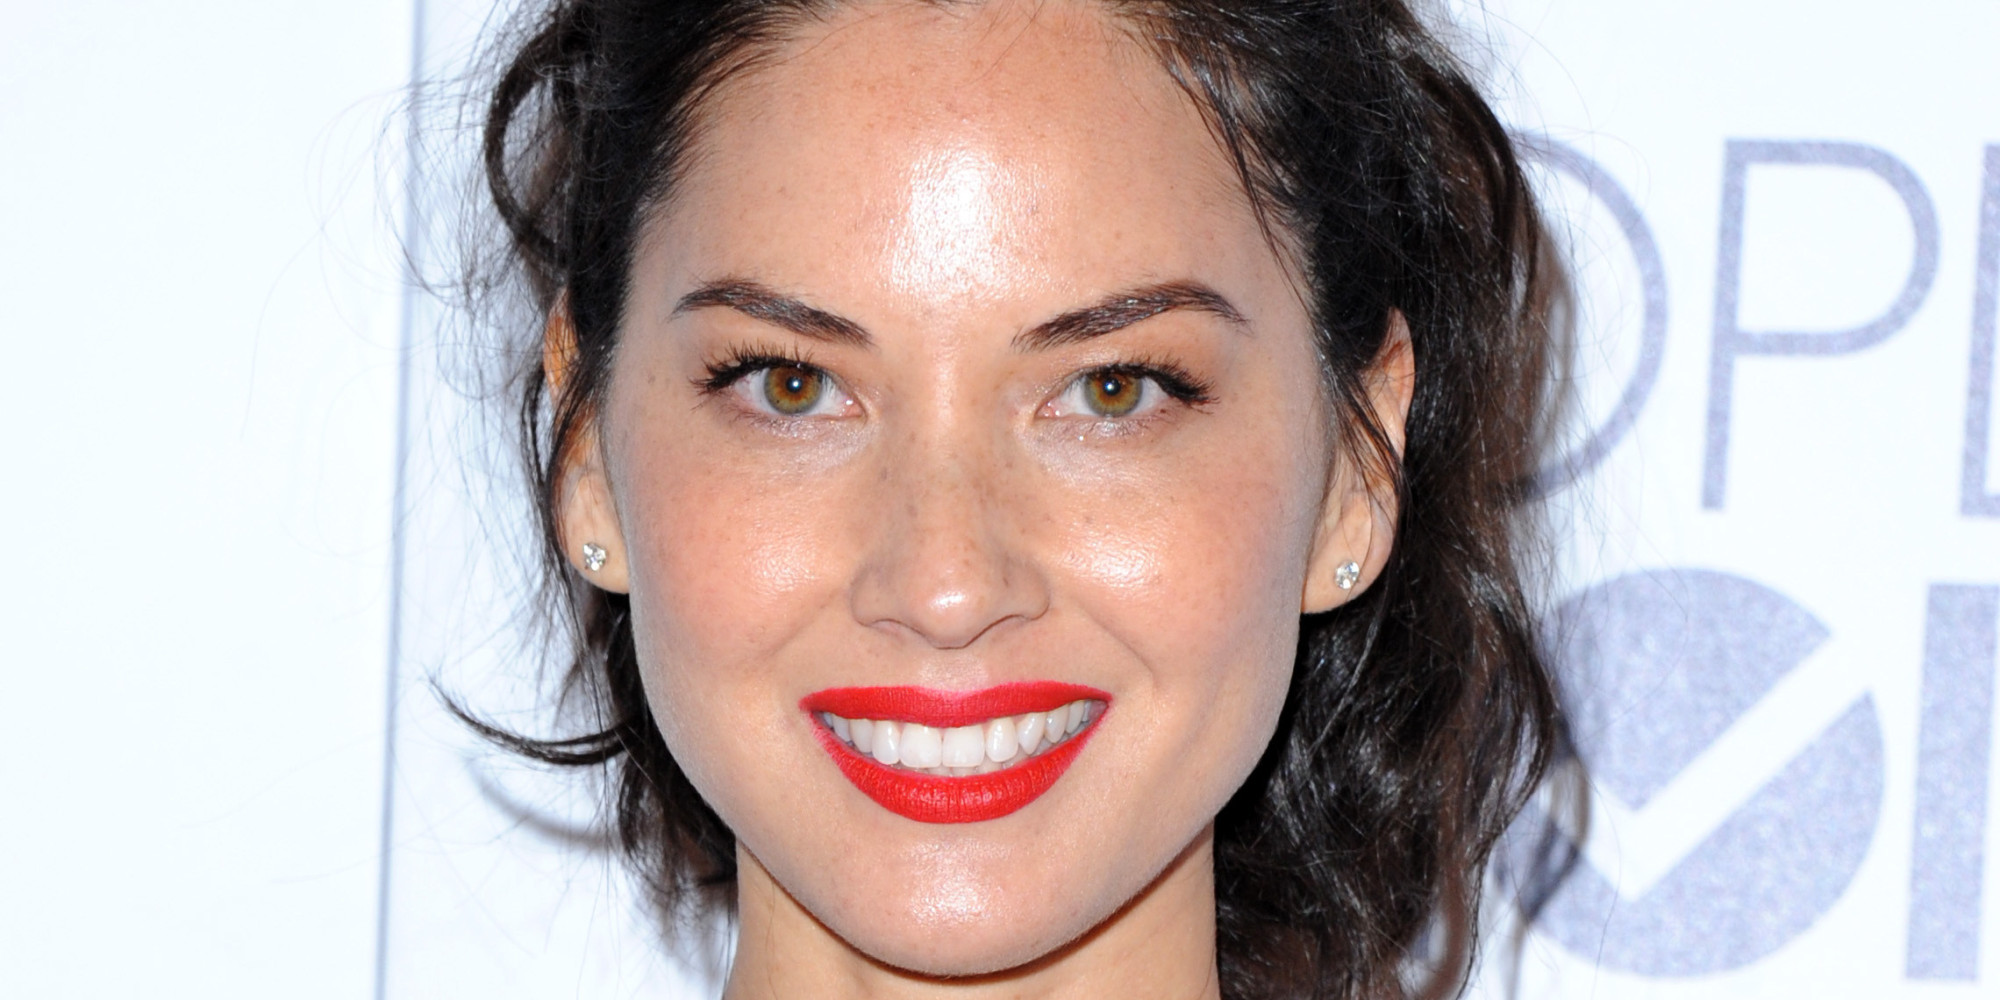 Olivia Munn Brings In The New Year With Gorgeous, Glowing Skin | HuffPost